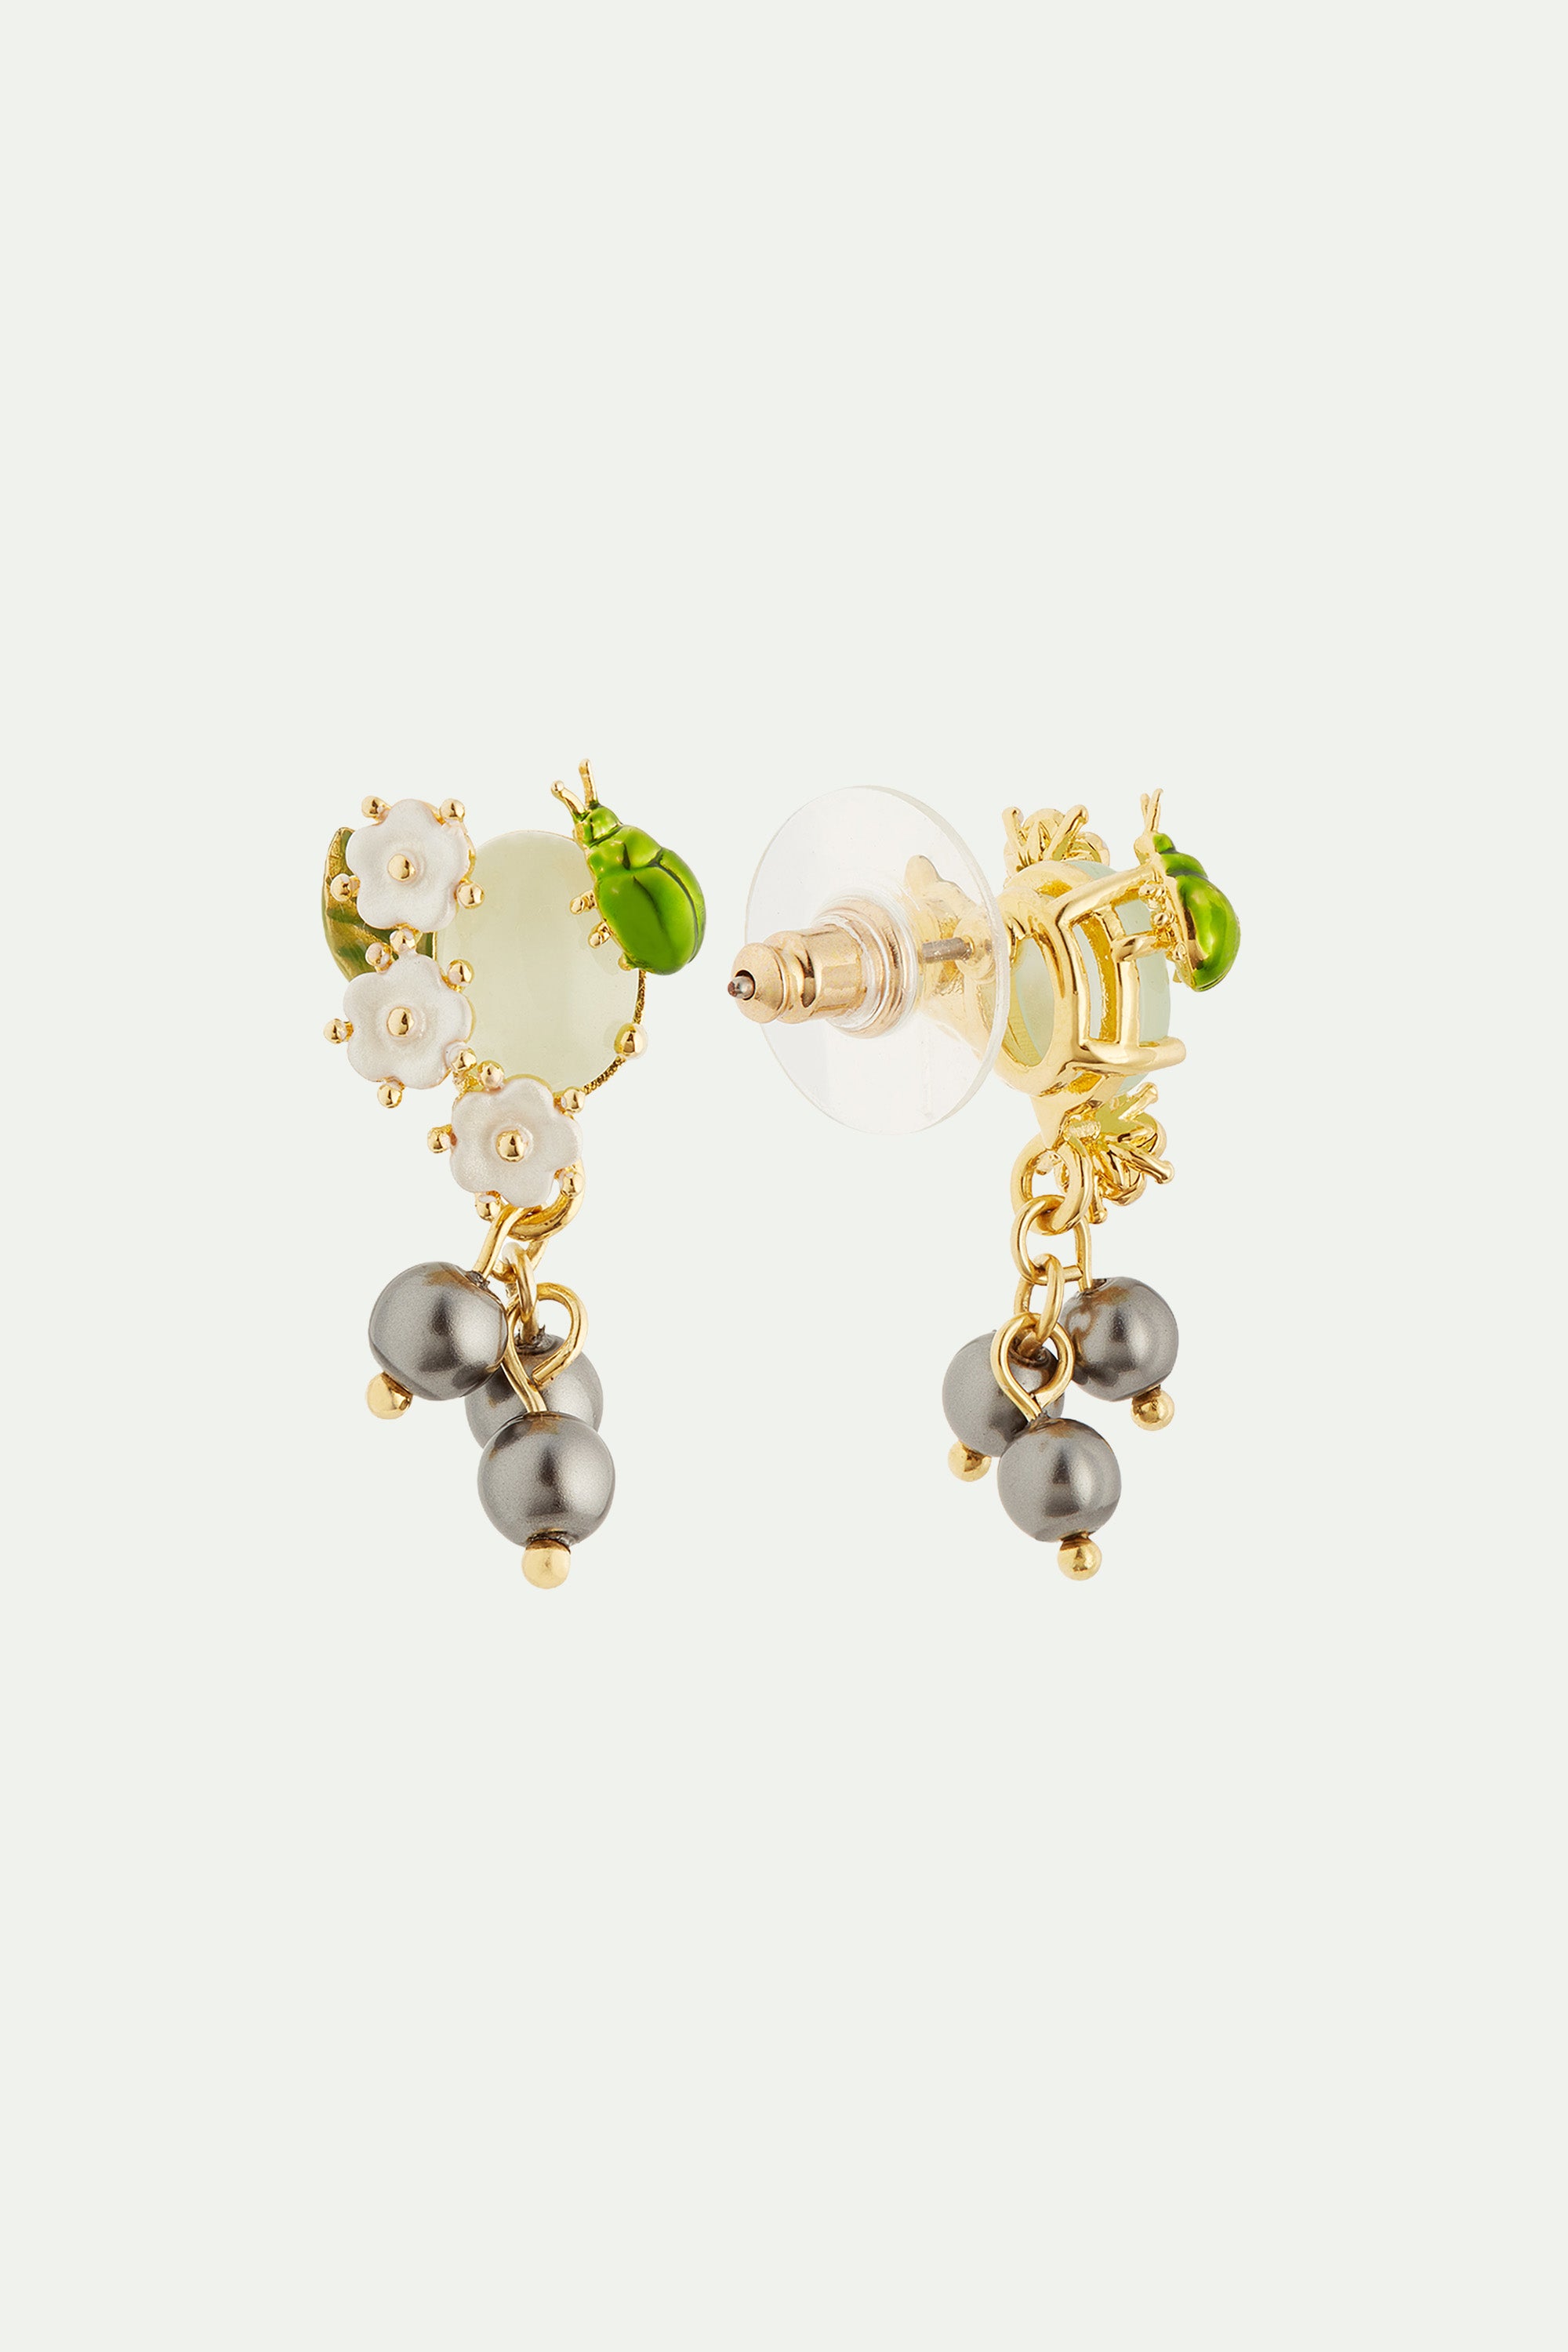 Blueberry and scarab beetle post earrings